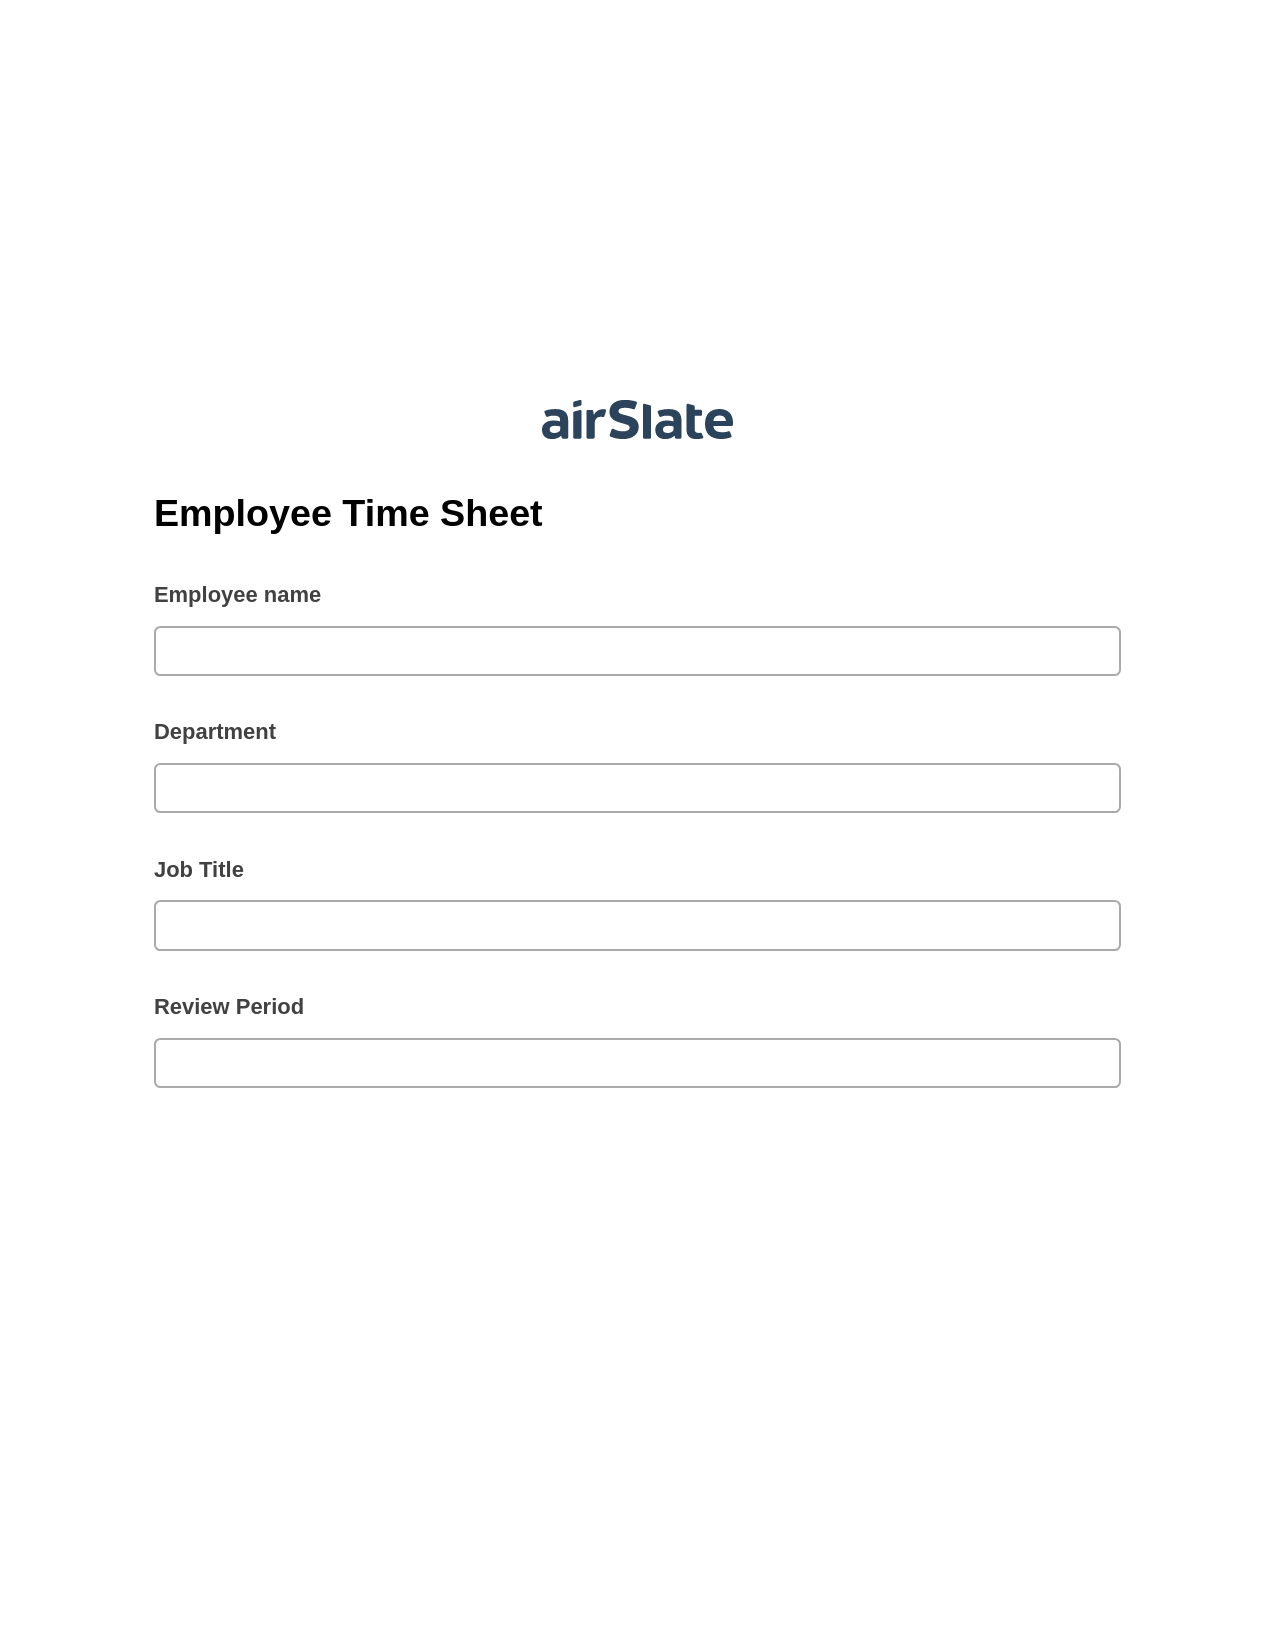 Multirole Employee Time Sheet Pre-fill from Salesforce Records with SOQL Bot, Create Salesforce Records Bot, Export to Excel 365 Bot